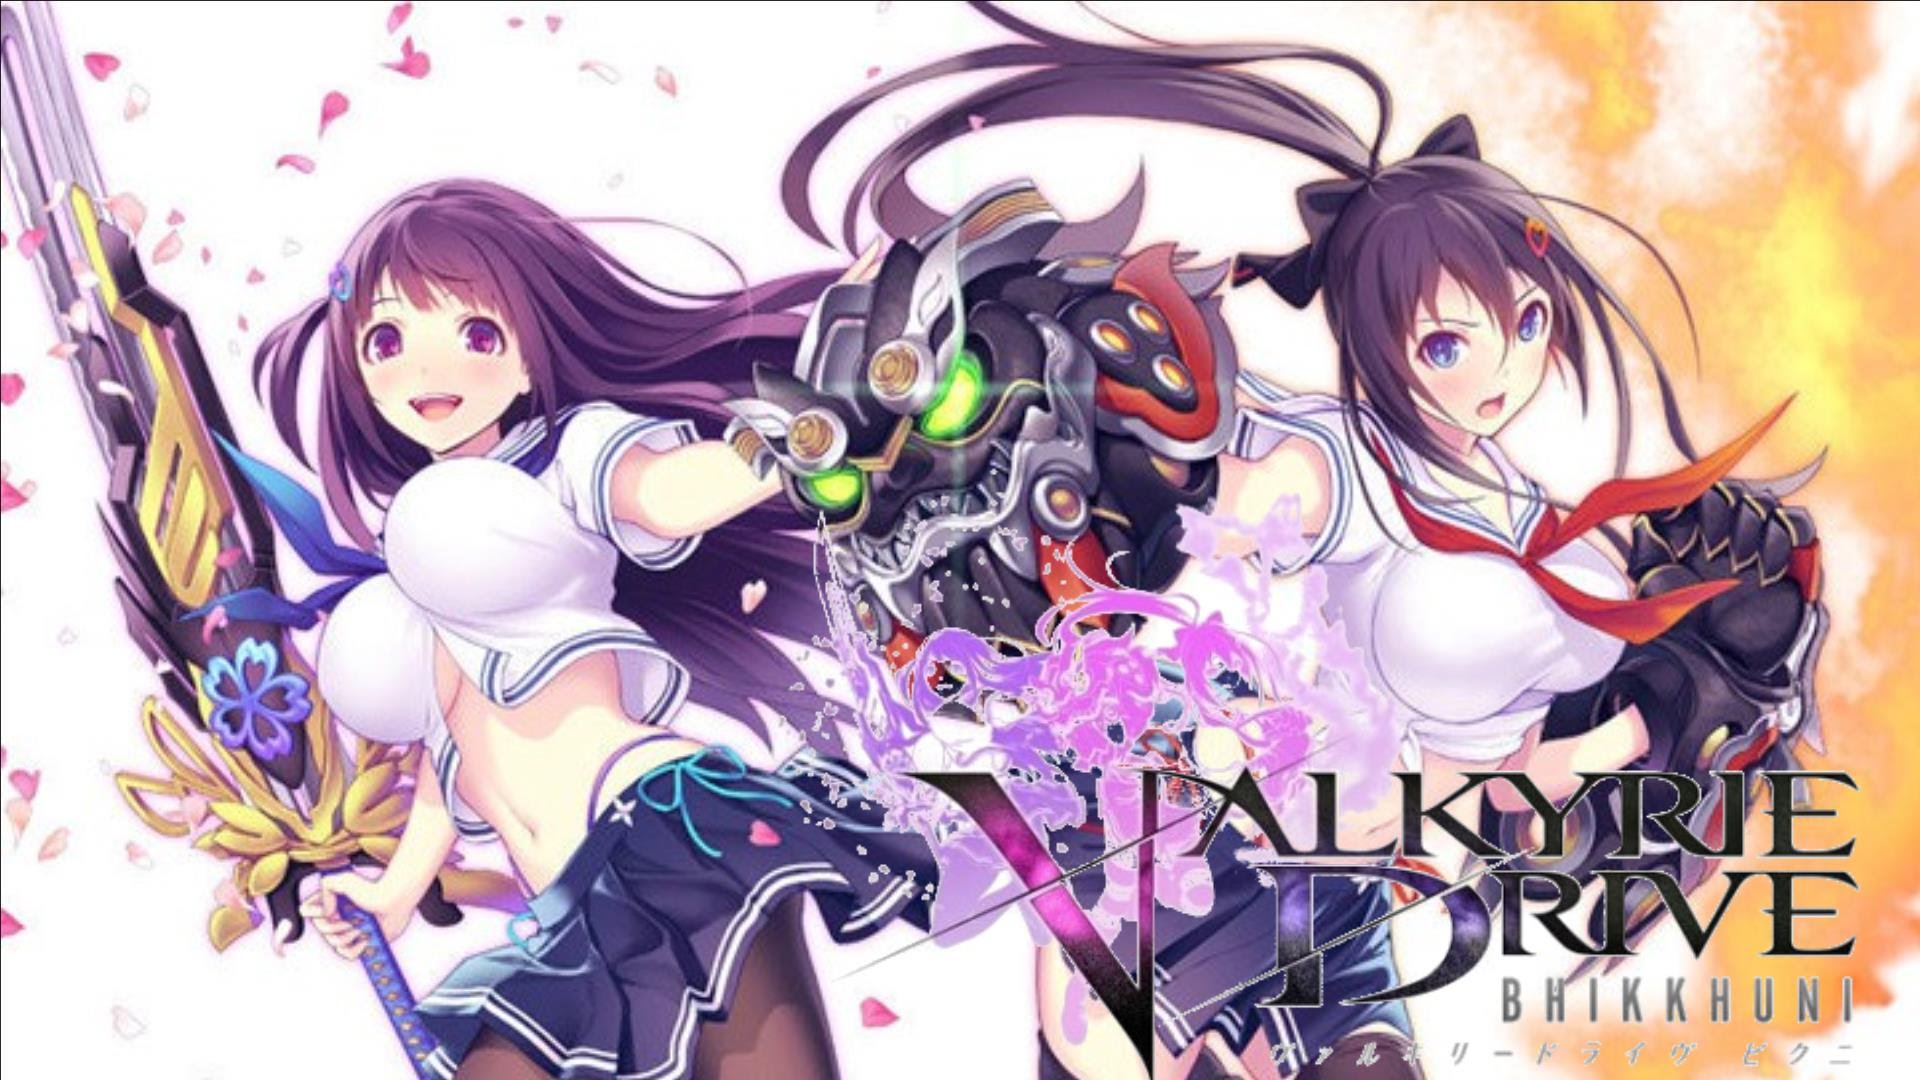 Valkyrie Drive Wallpapers Anime Hq Valkyrie Drive Pictures 4k Wallpapers 19